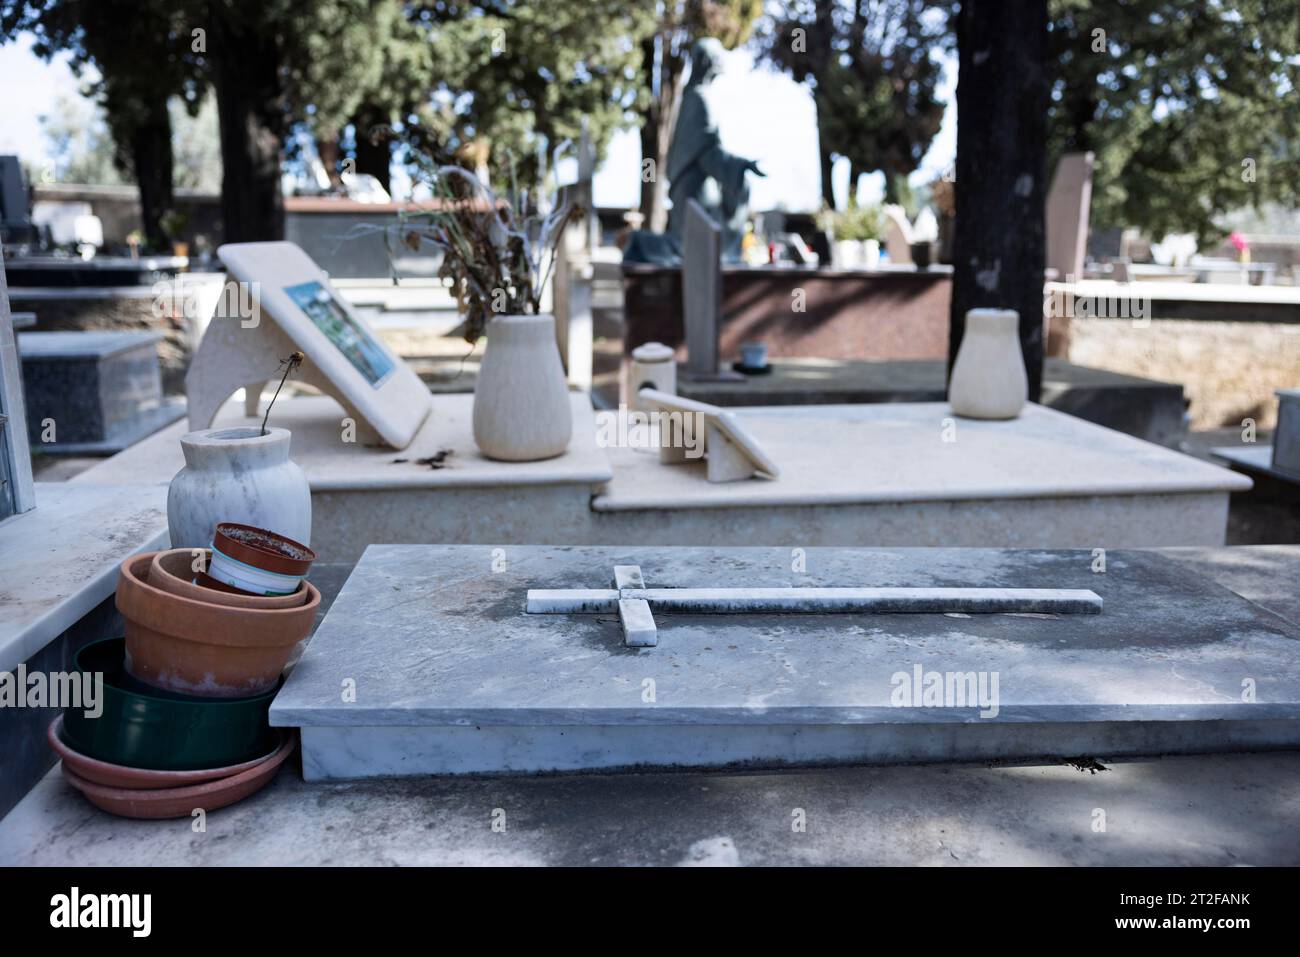 Grave with a single wilted flower in a vase and empty flower pots, Bari Sardo, Sardinia, Italy Stock Photo